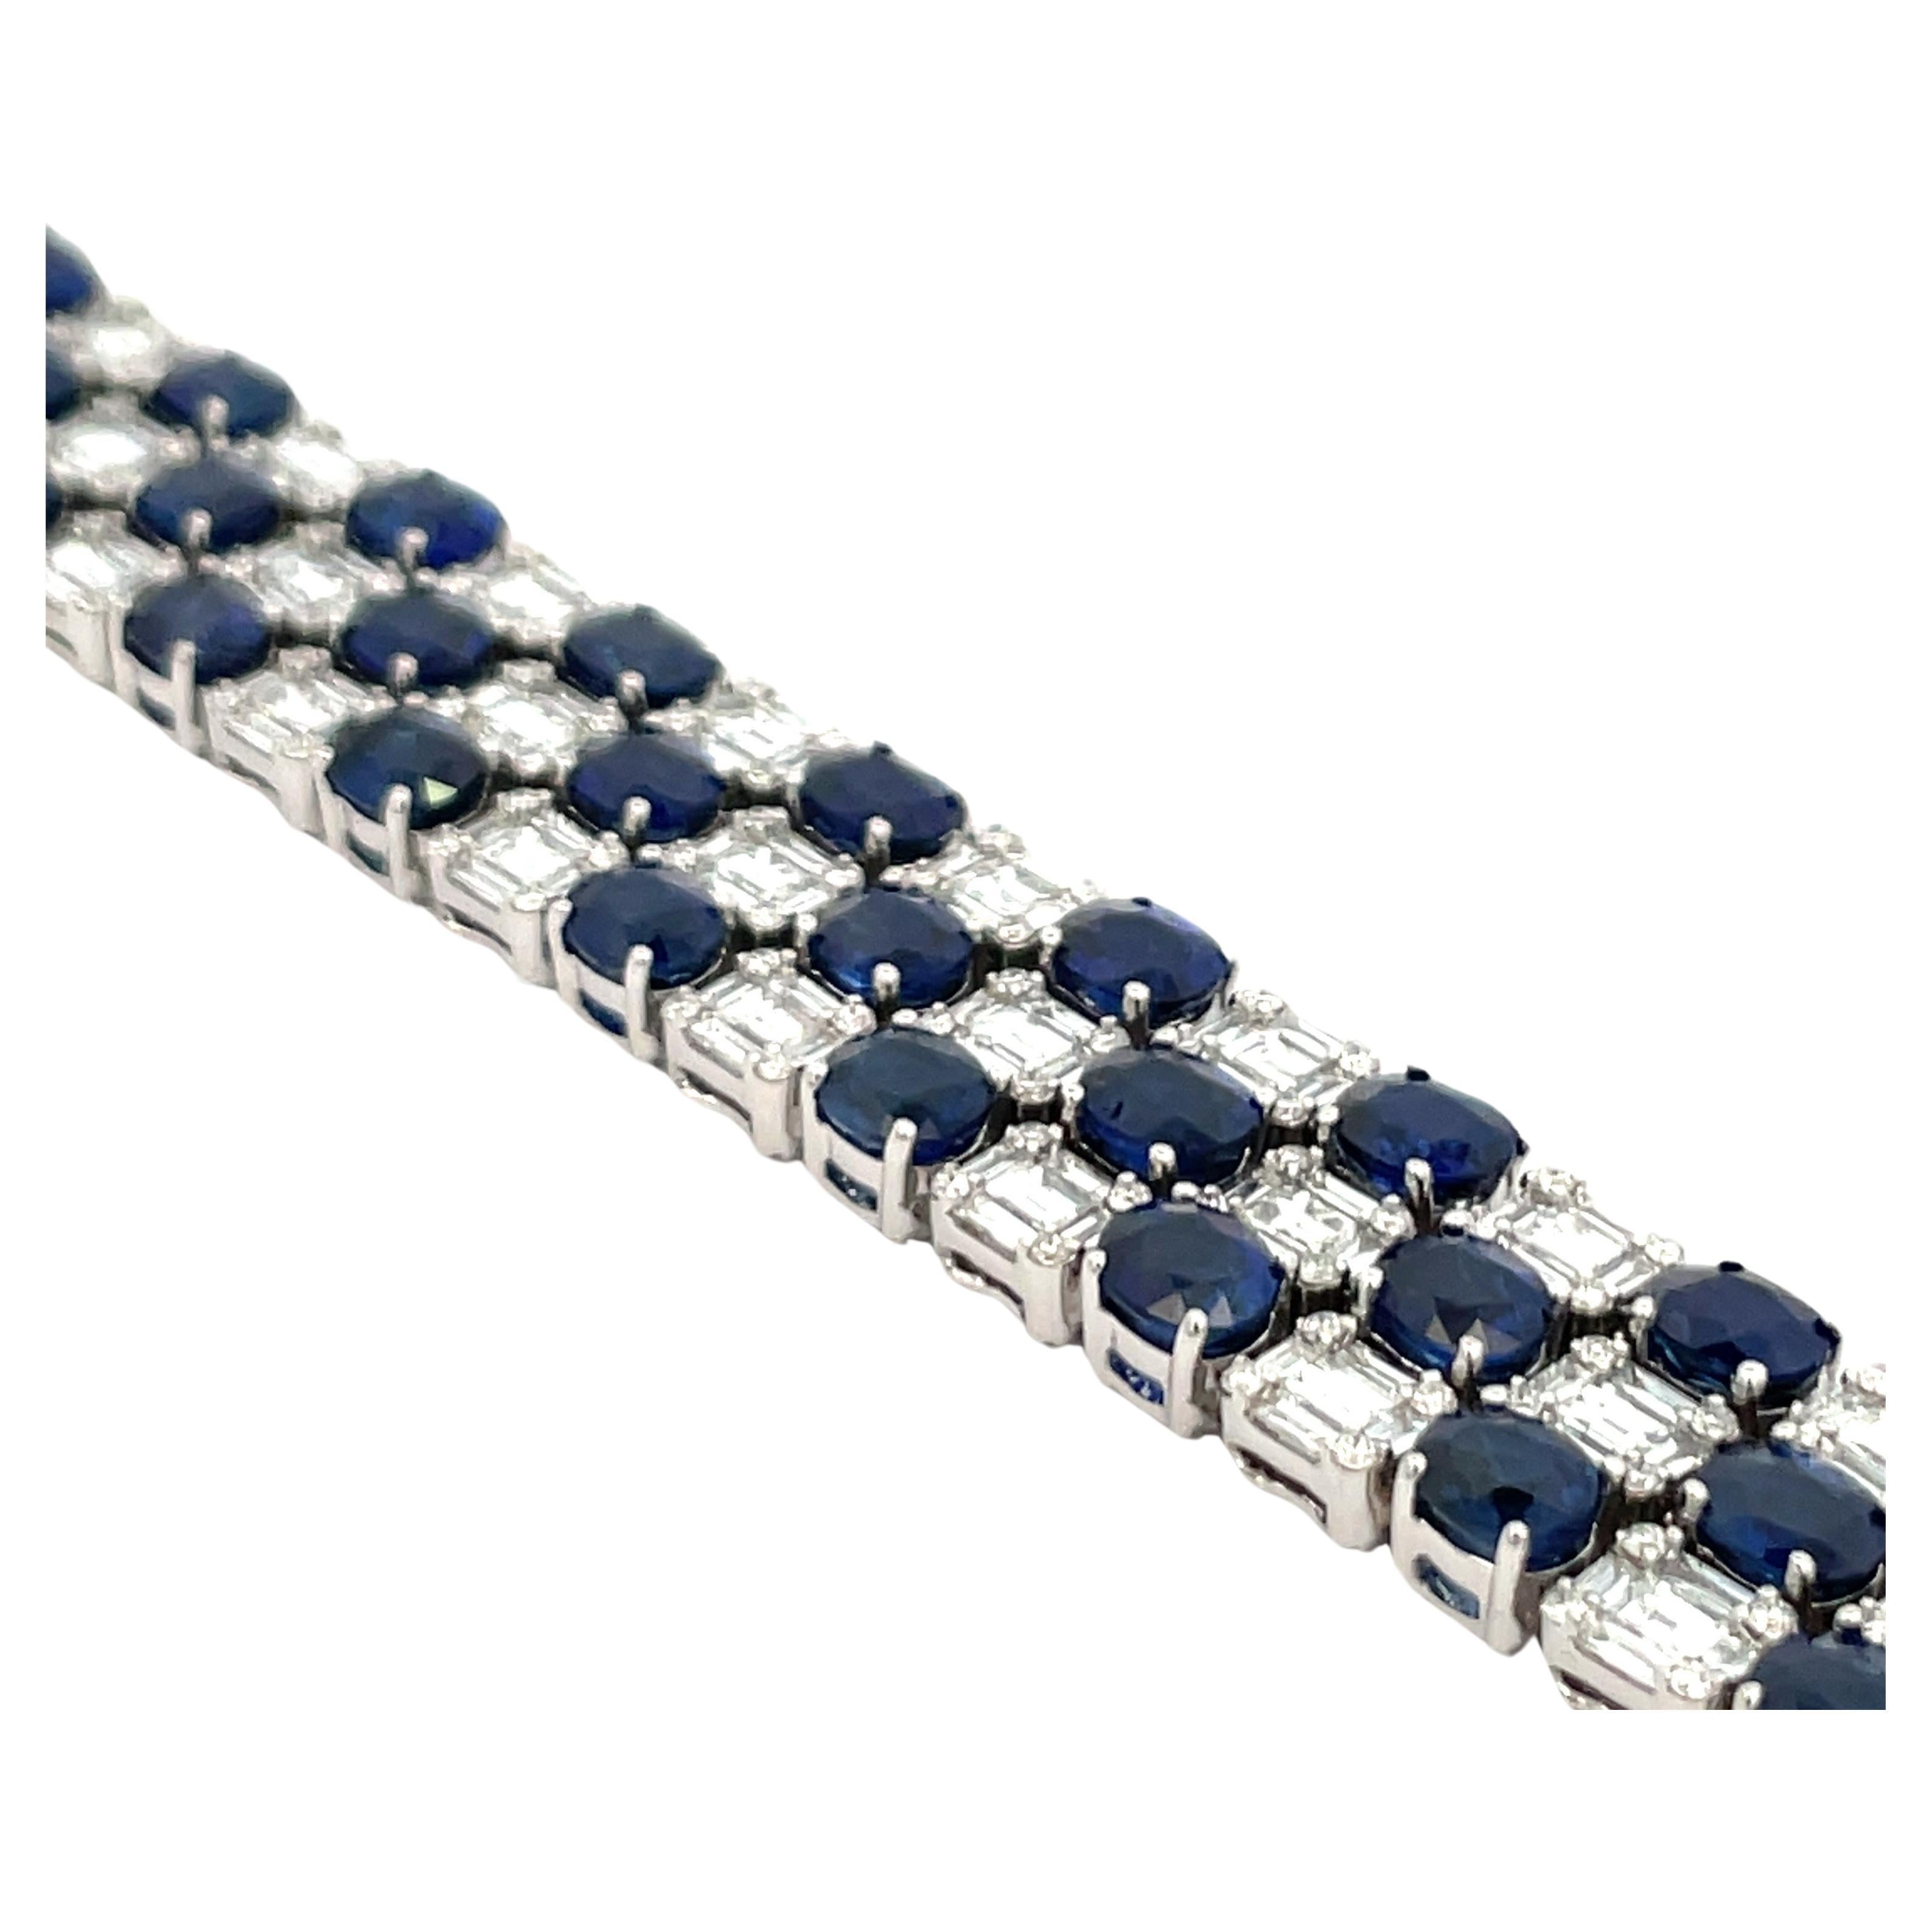 Oval Cut Sapphire Diamond Illusion Bracelet 25.67 CTTW 18 Karat White Gold In New Condition For Sale In New York, NY